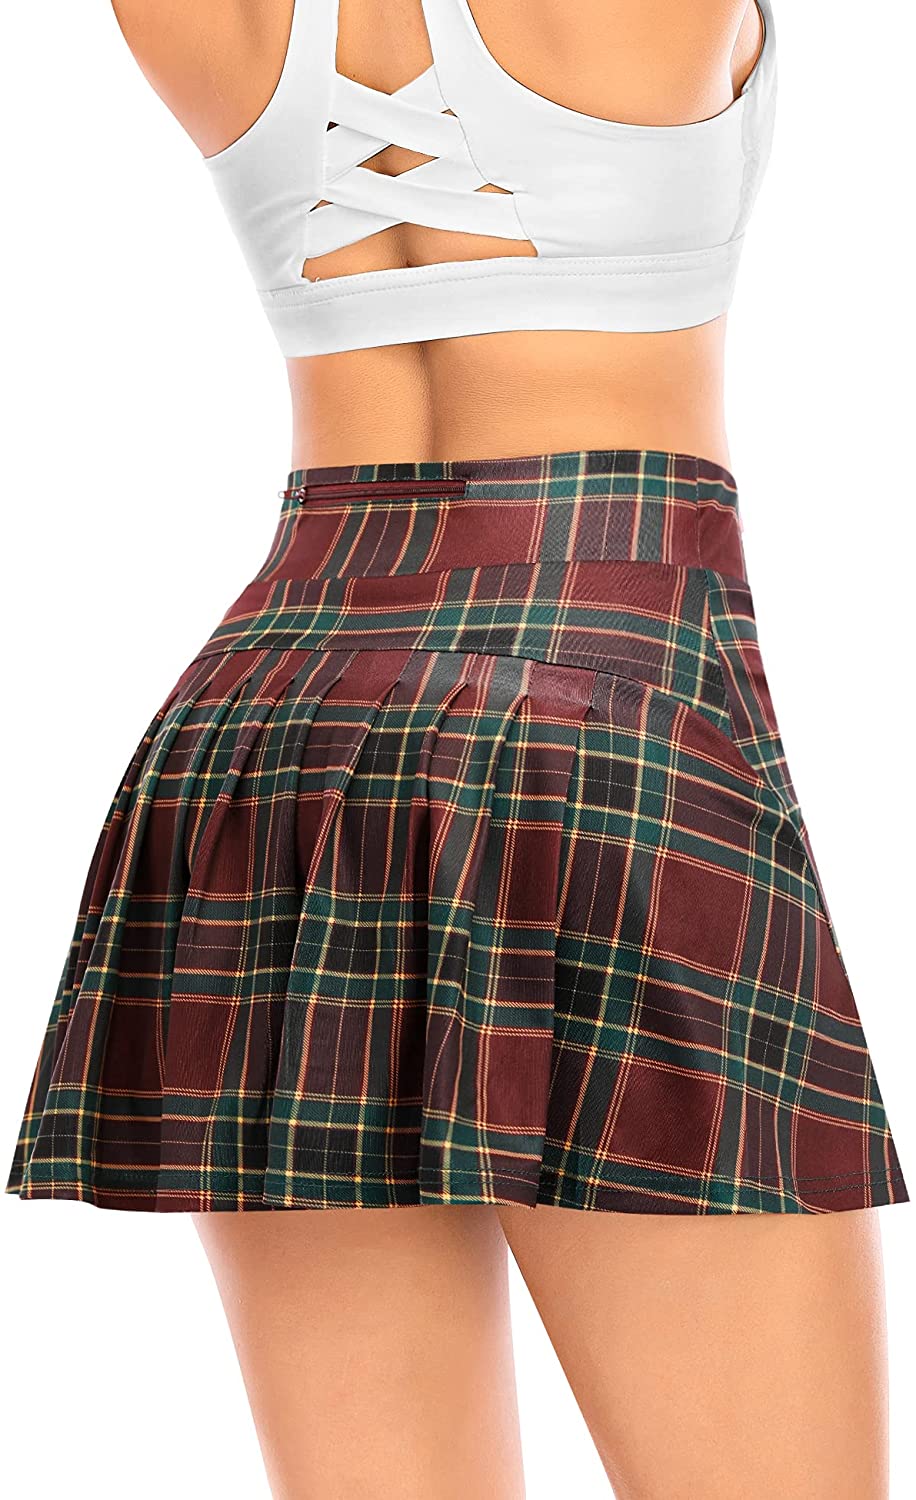 Pleated Tennis Skirts for Women with Pockets Shorts Athletic Golf Skorts  Activew | eBay